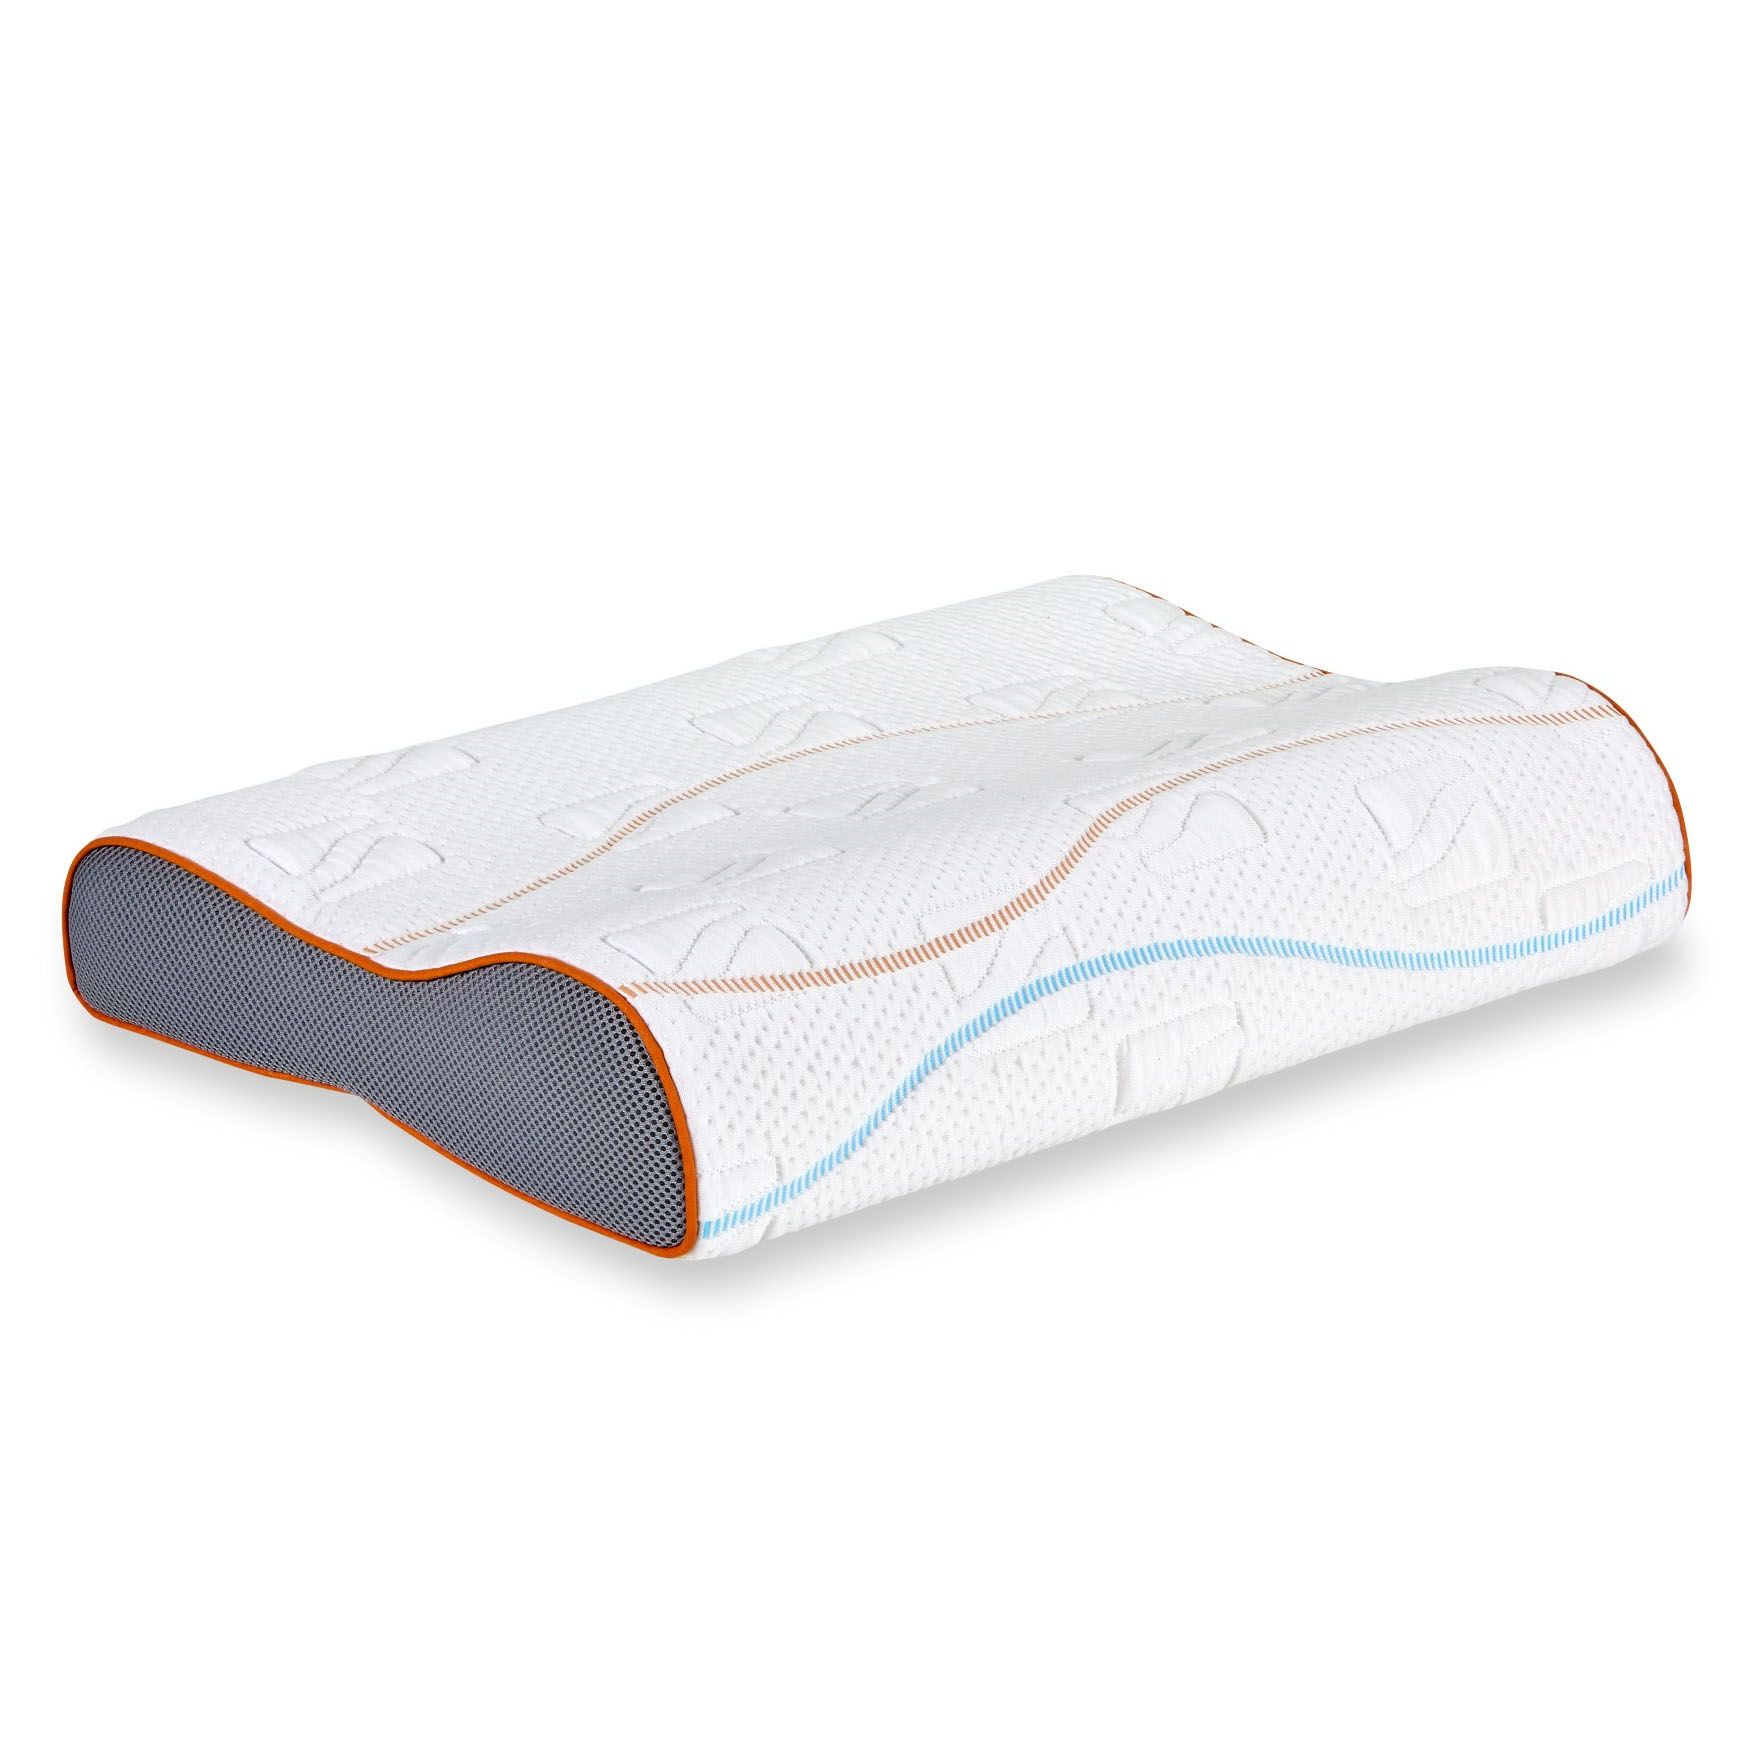 M Line Orthopaedic Wave Pillow for sale